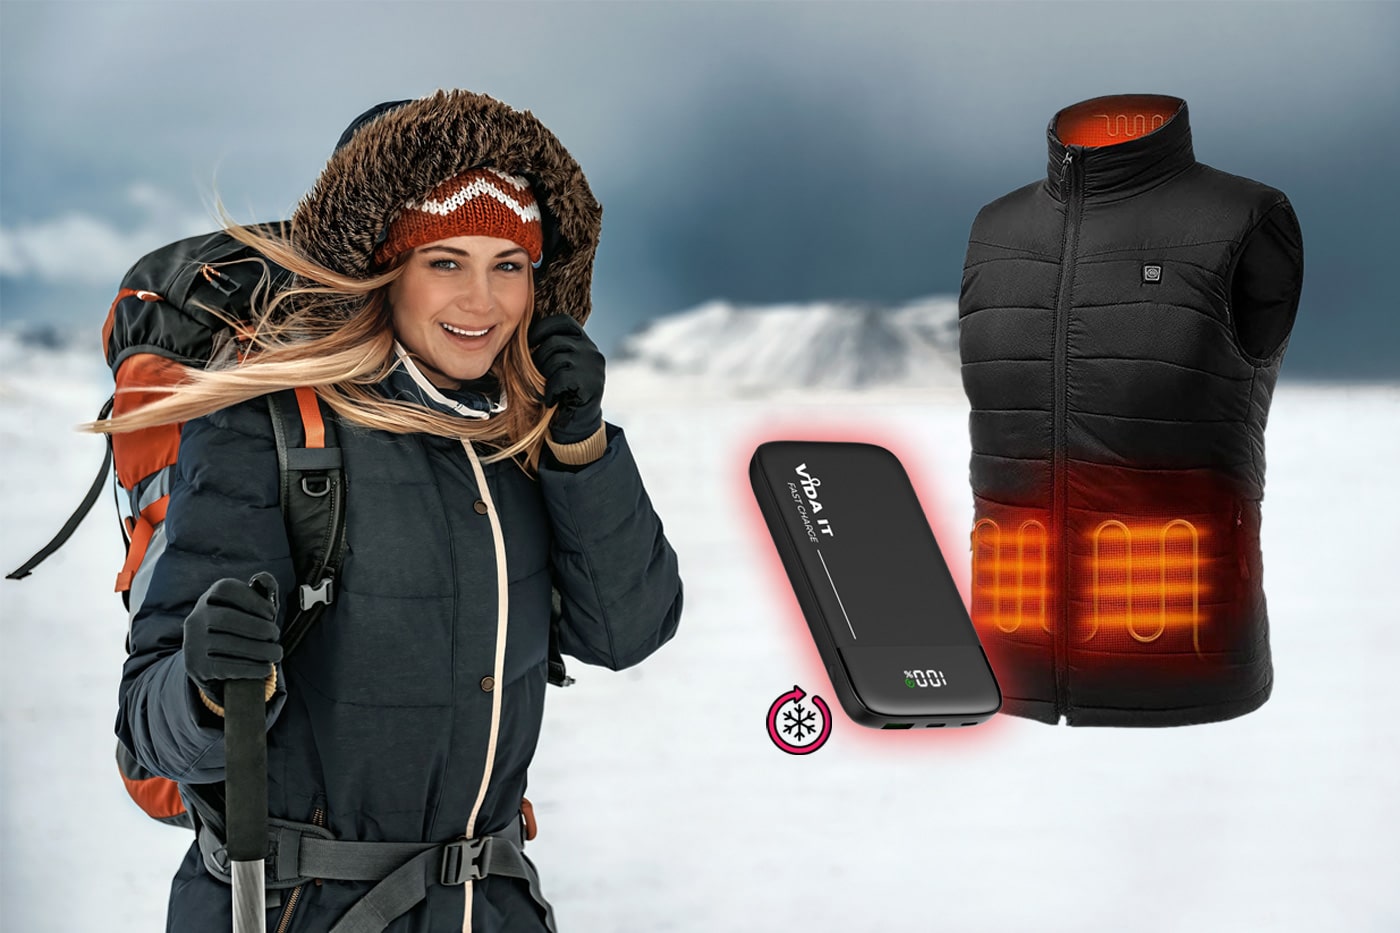 Power banks and battery packs for heated clothing